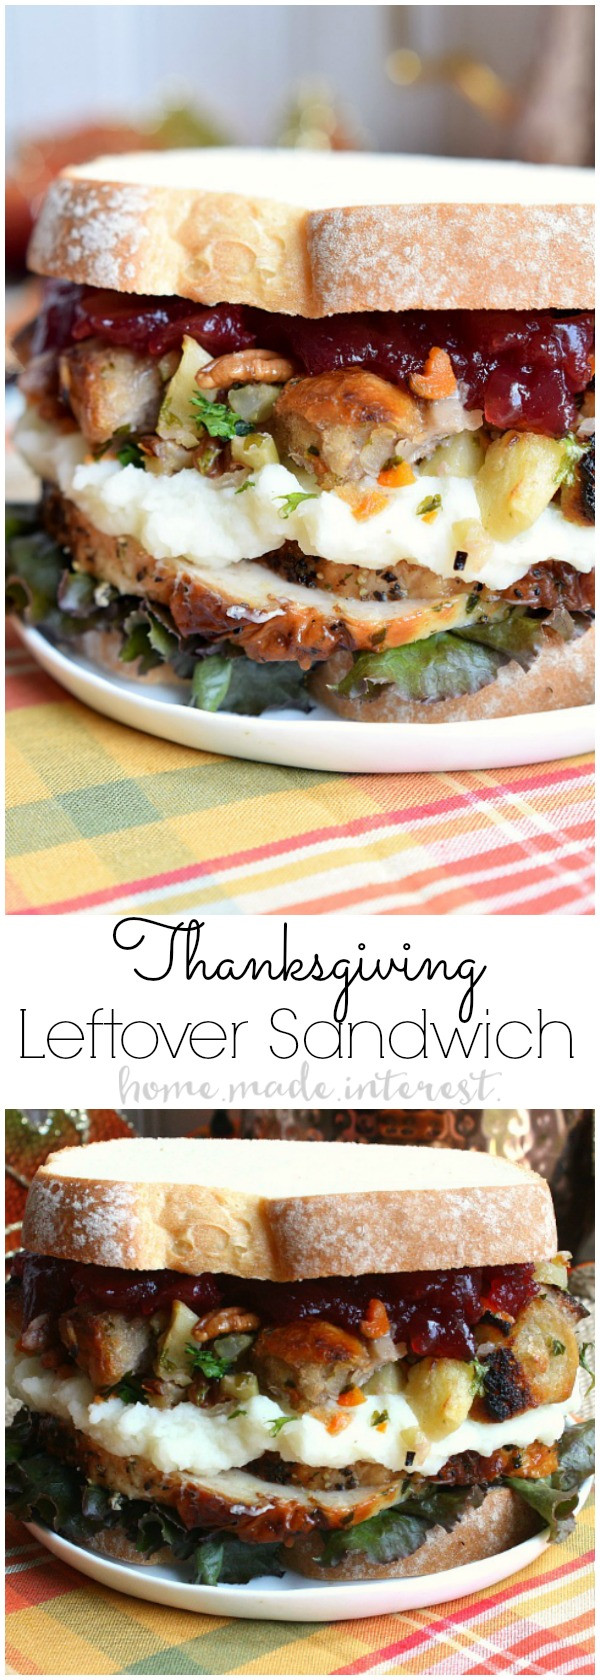 Thanksgiving Leftovers Recipes
 Thanksgiving Leftovers Sandwich Home Made Interest